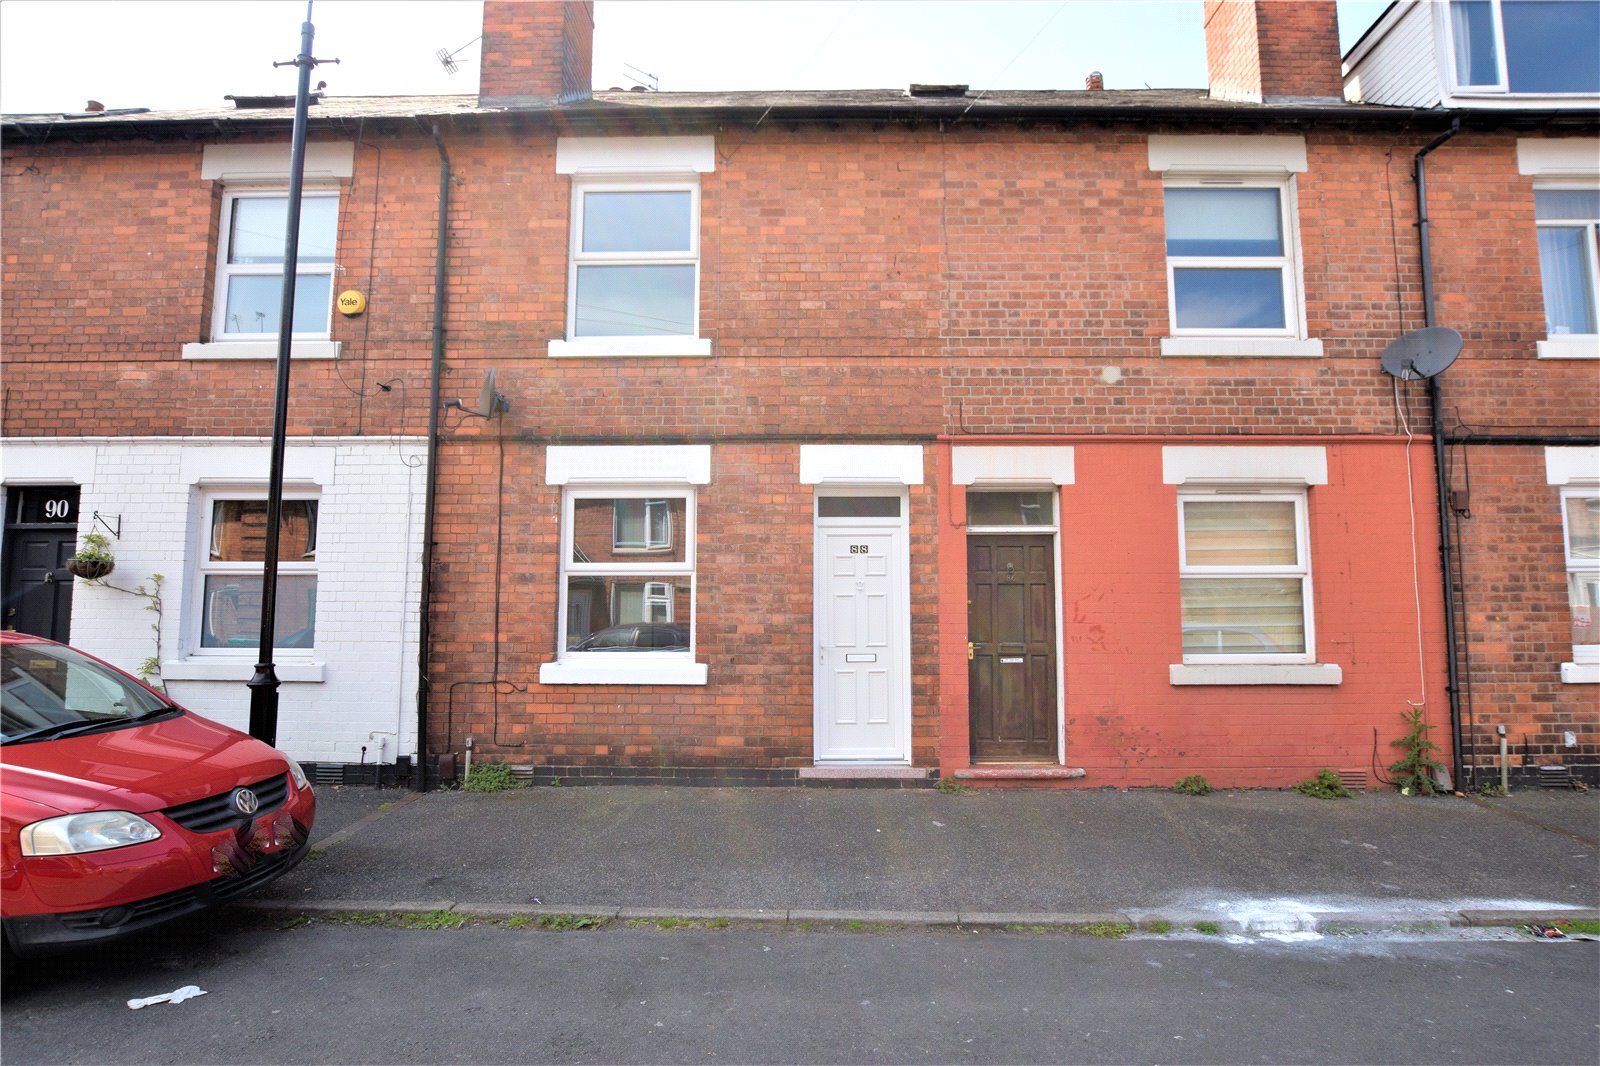 3 bed house to rent in Woolmer Road, Nottingham - Property Image 1